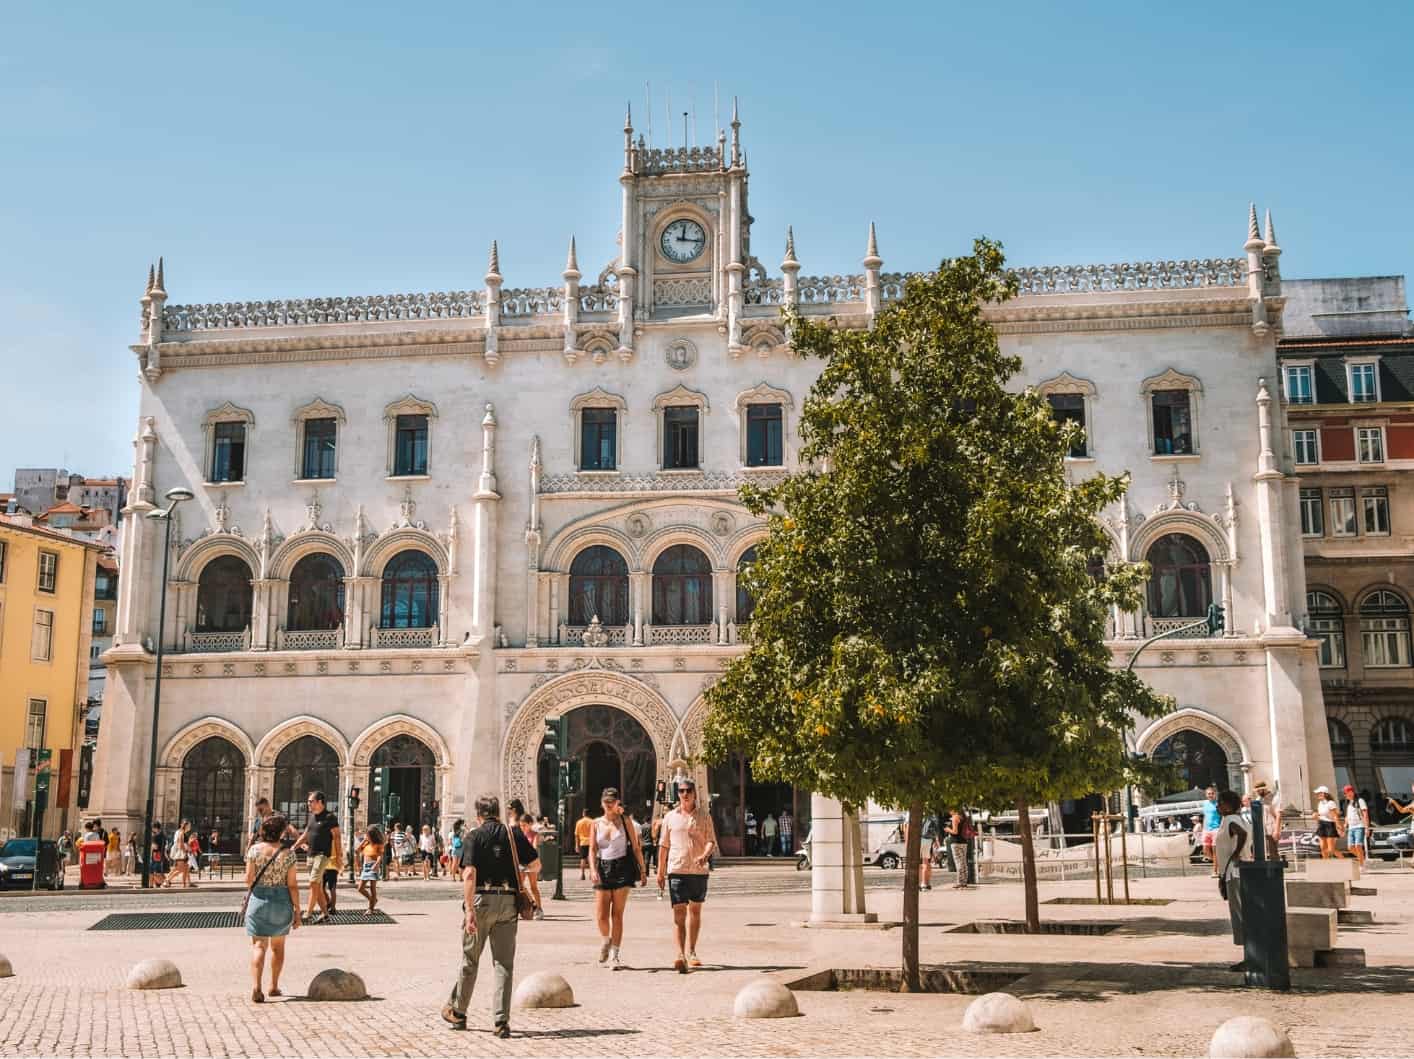 Rossio Station—Lisbon's main train station which happens to be beautiful and very old. 